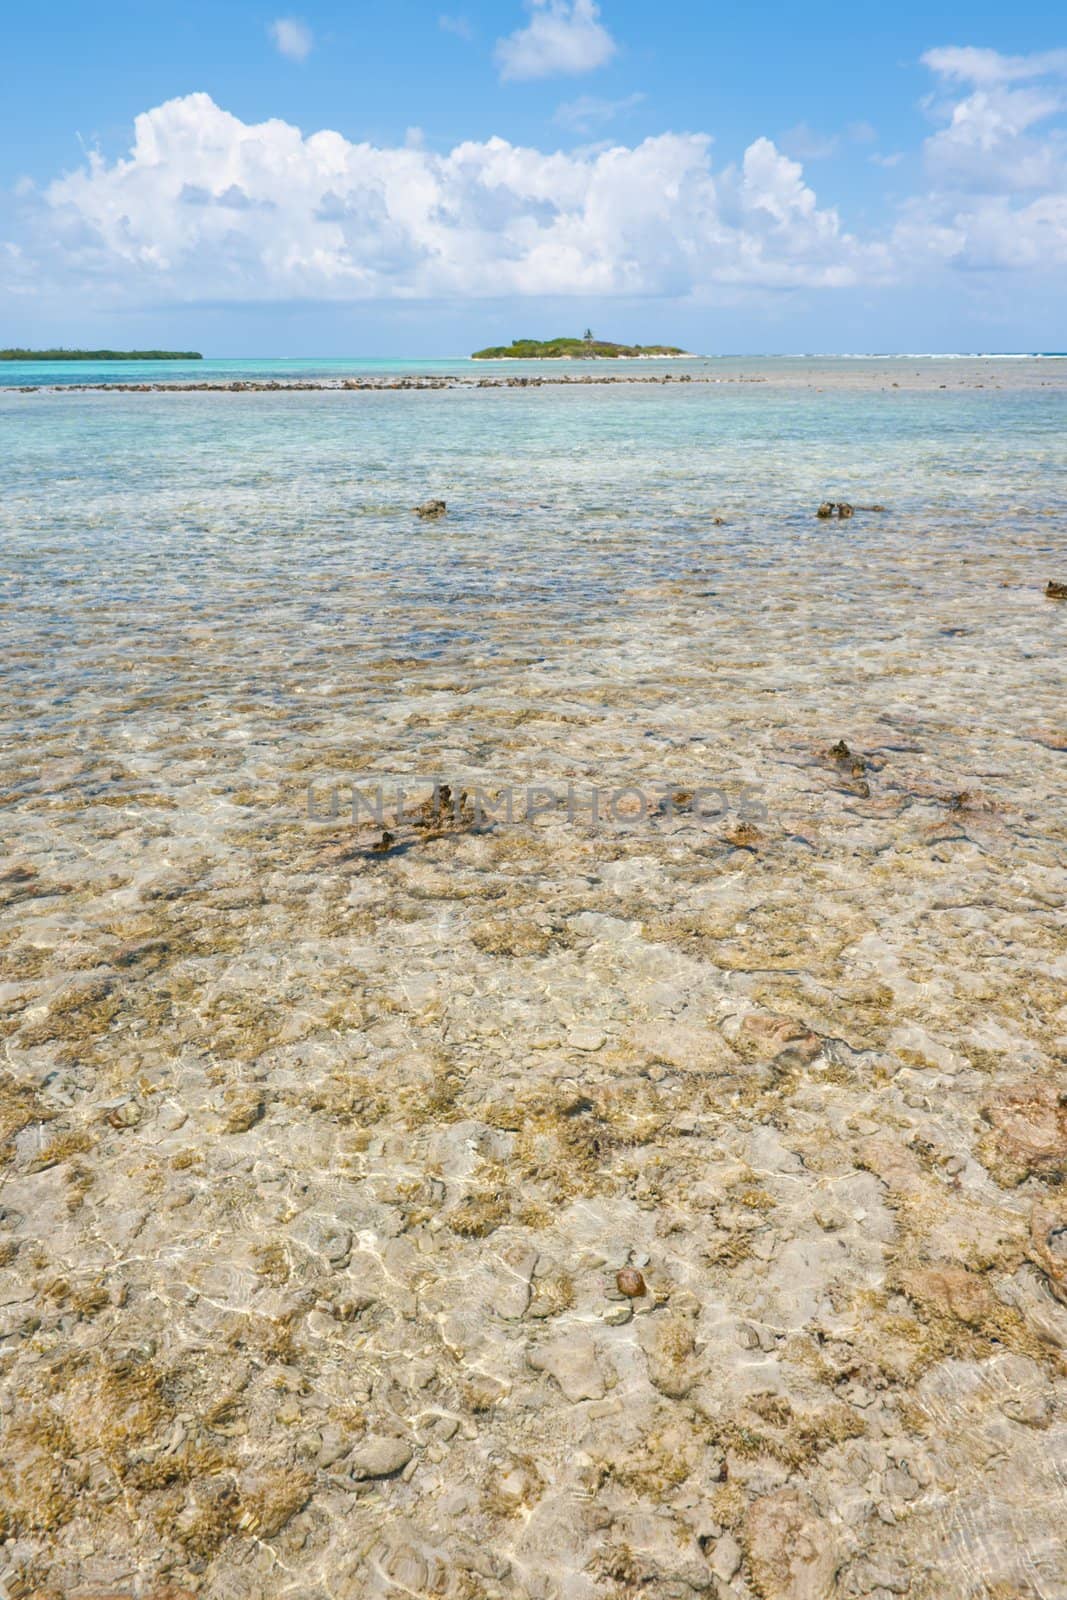 Coral reef, Turneffe atoll, Belize.